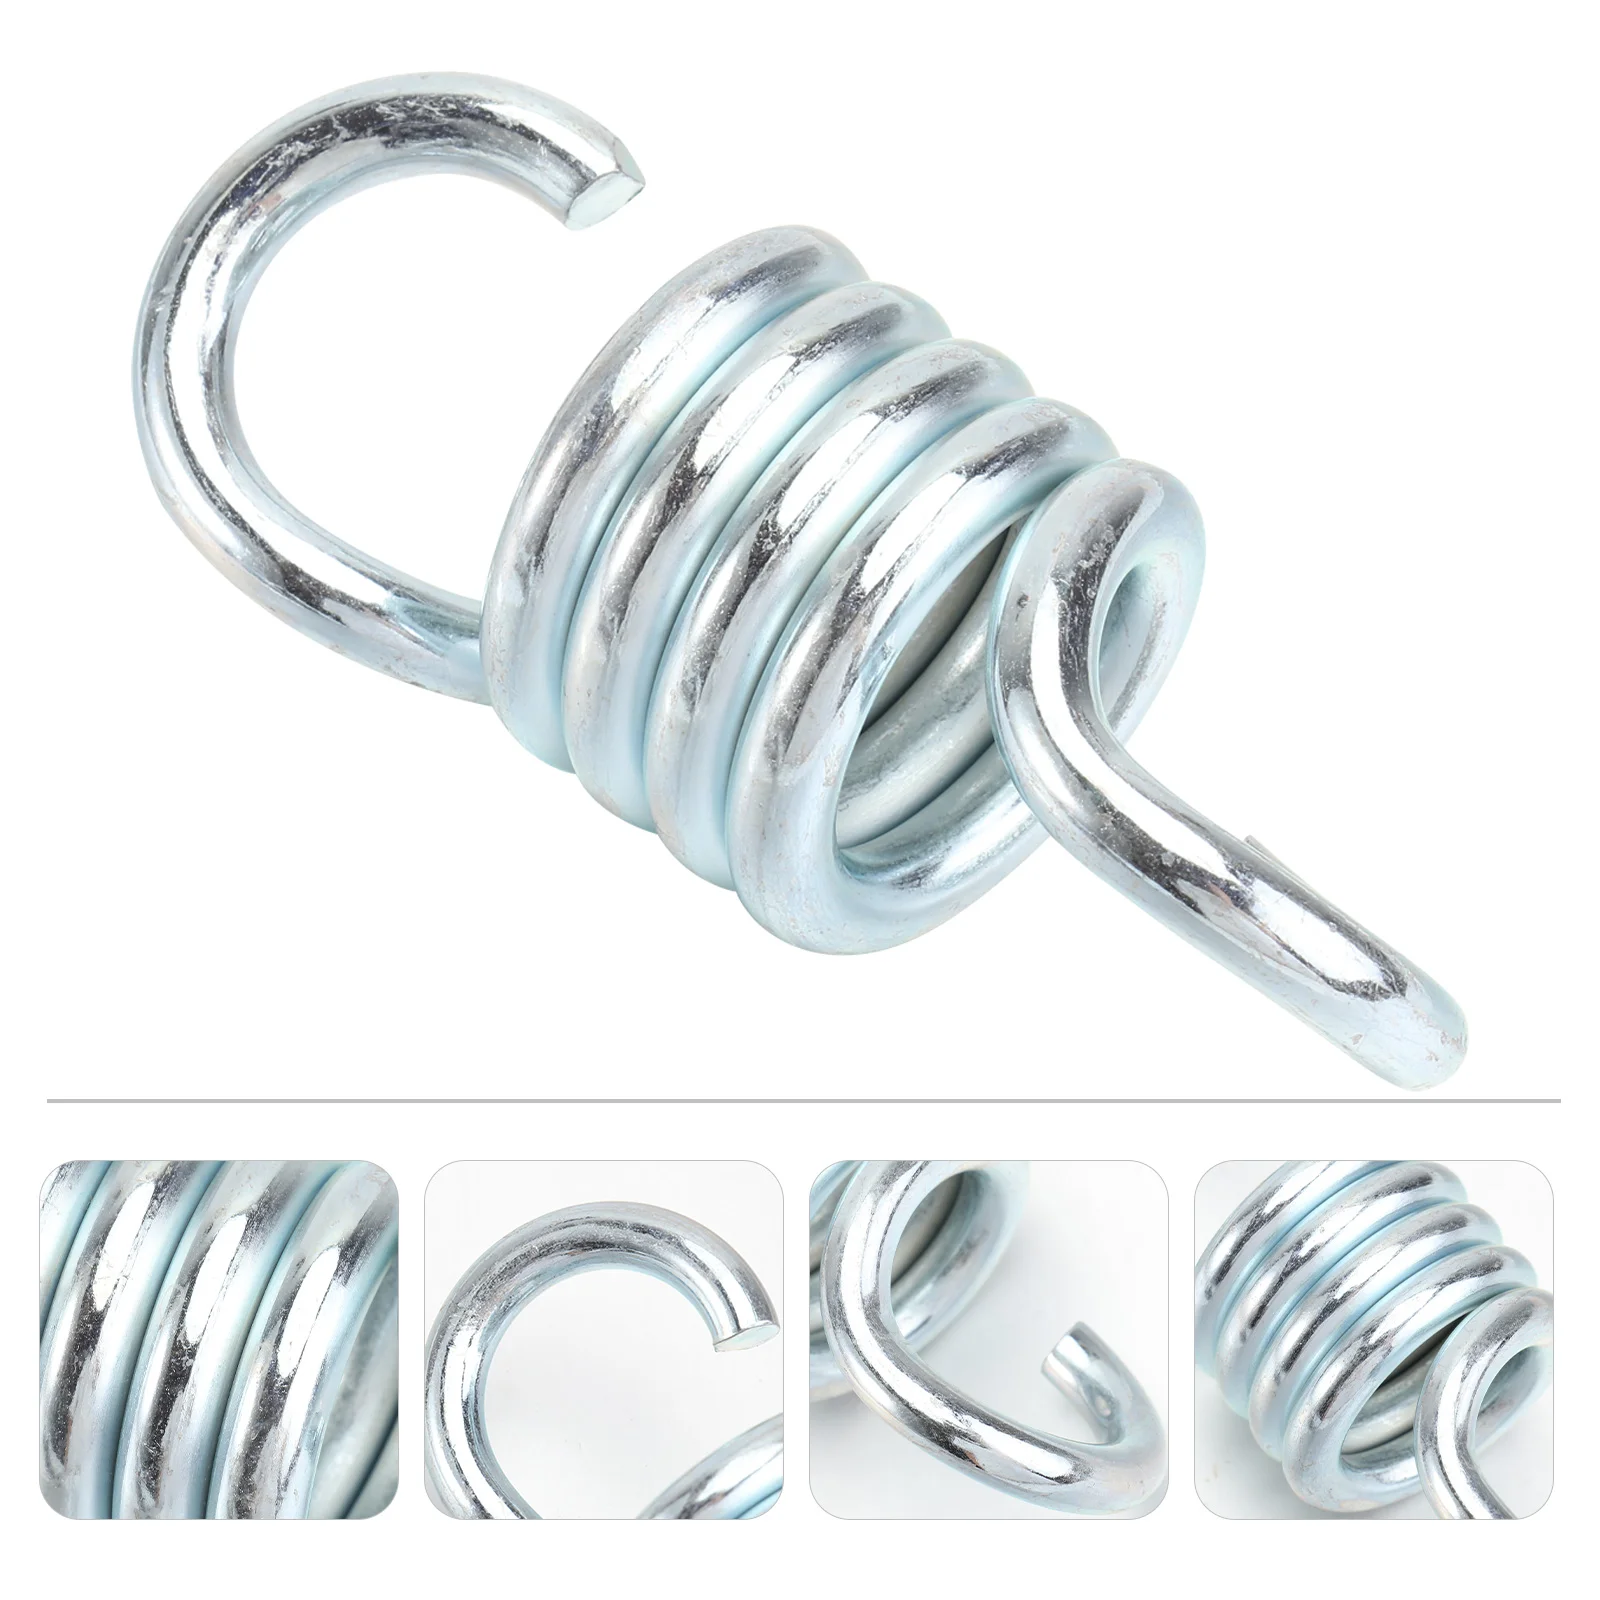 

Chair Heavy Bag Springs Heavy Duty Stainless Steel Suspension Hammock Springs for Hanging Porch Swing 200kg 7mm Women's wallet